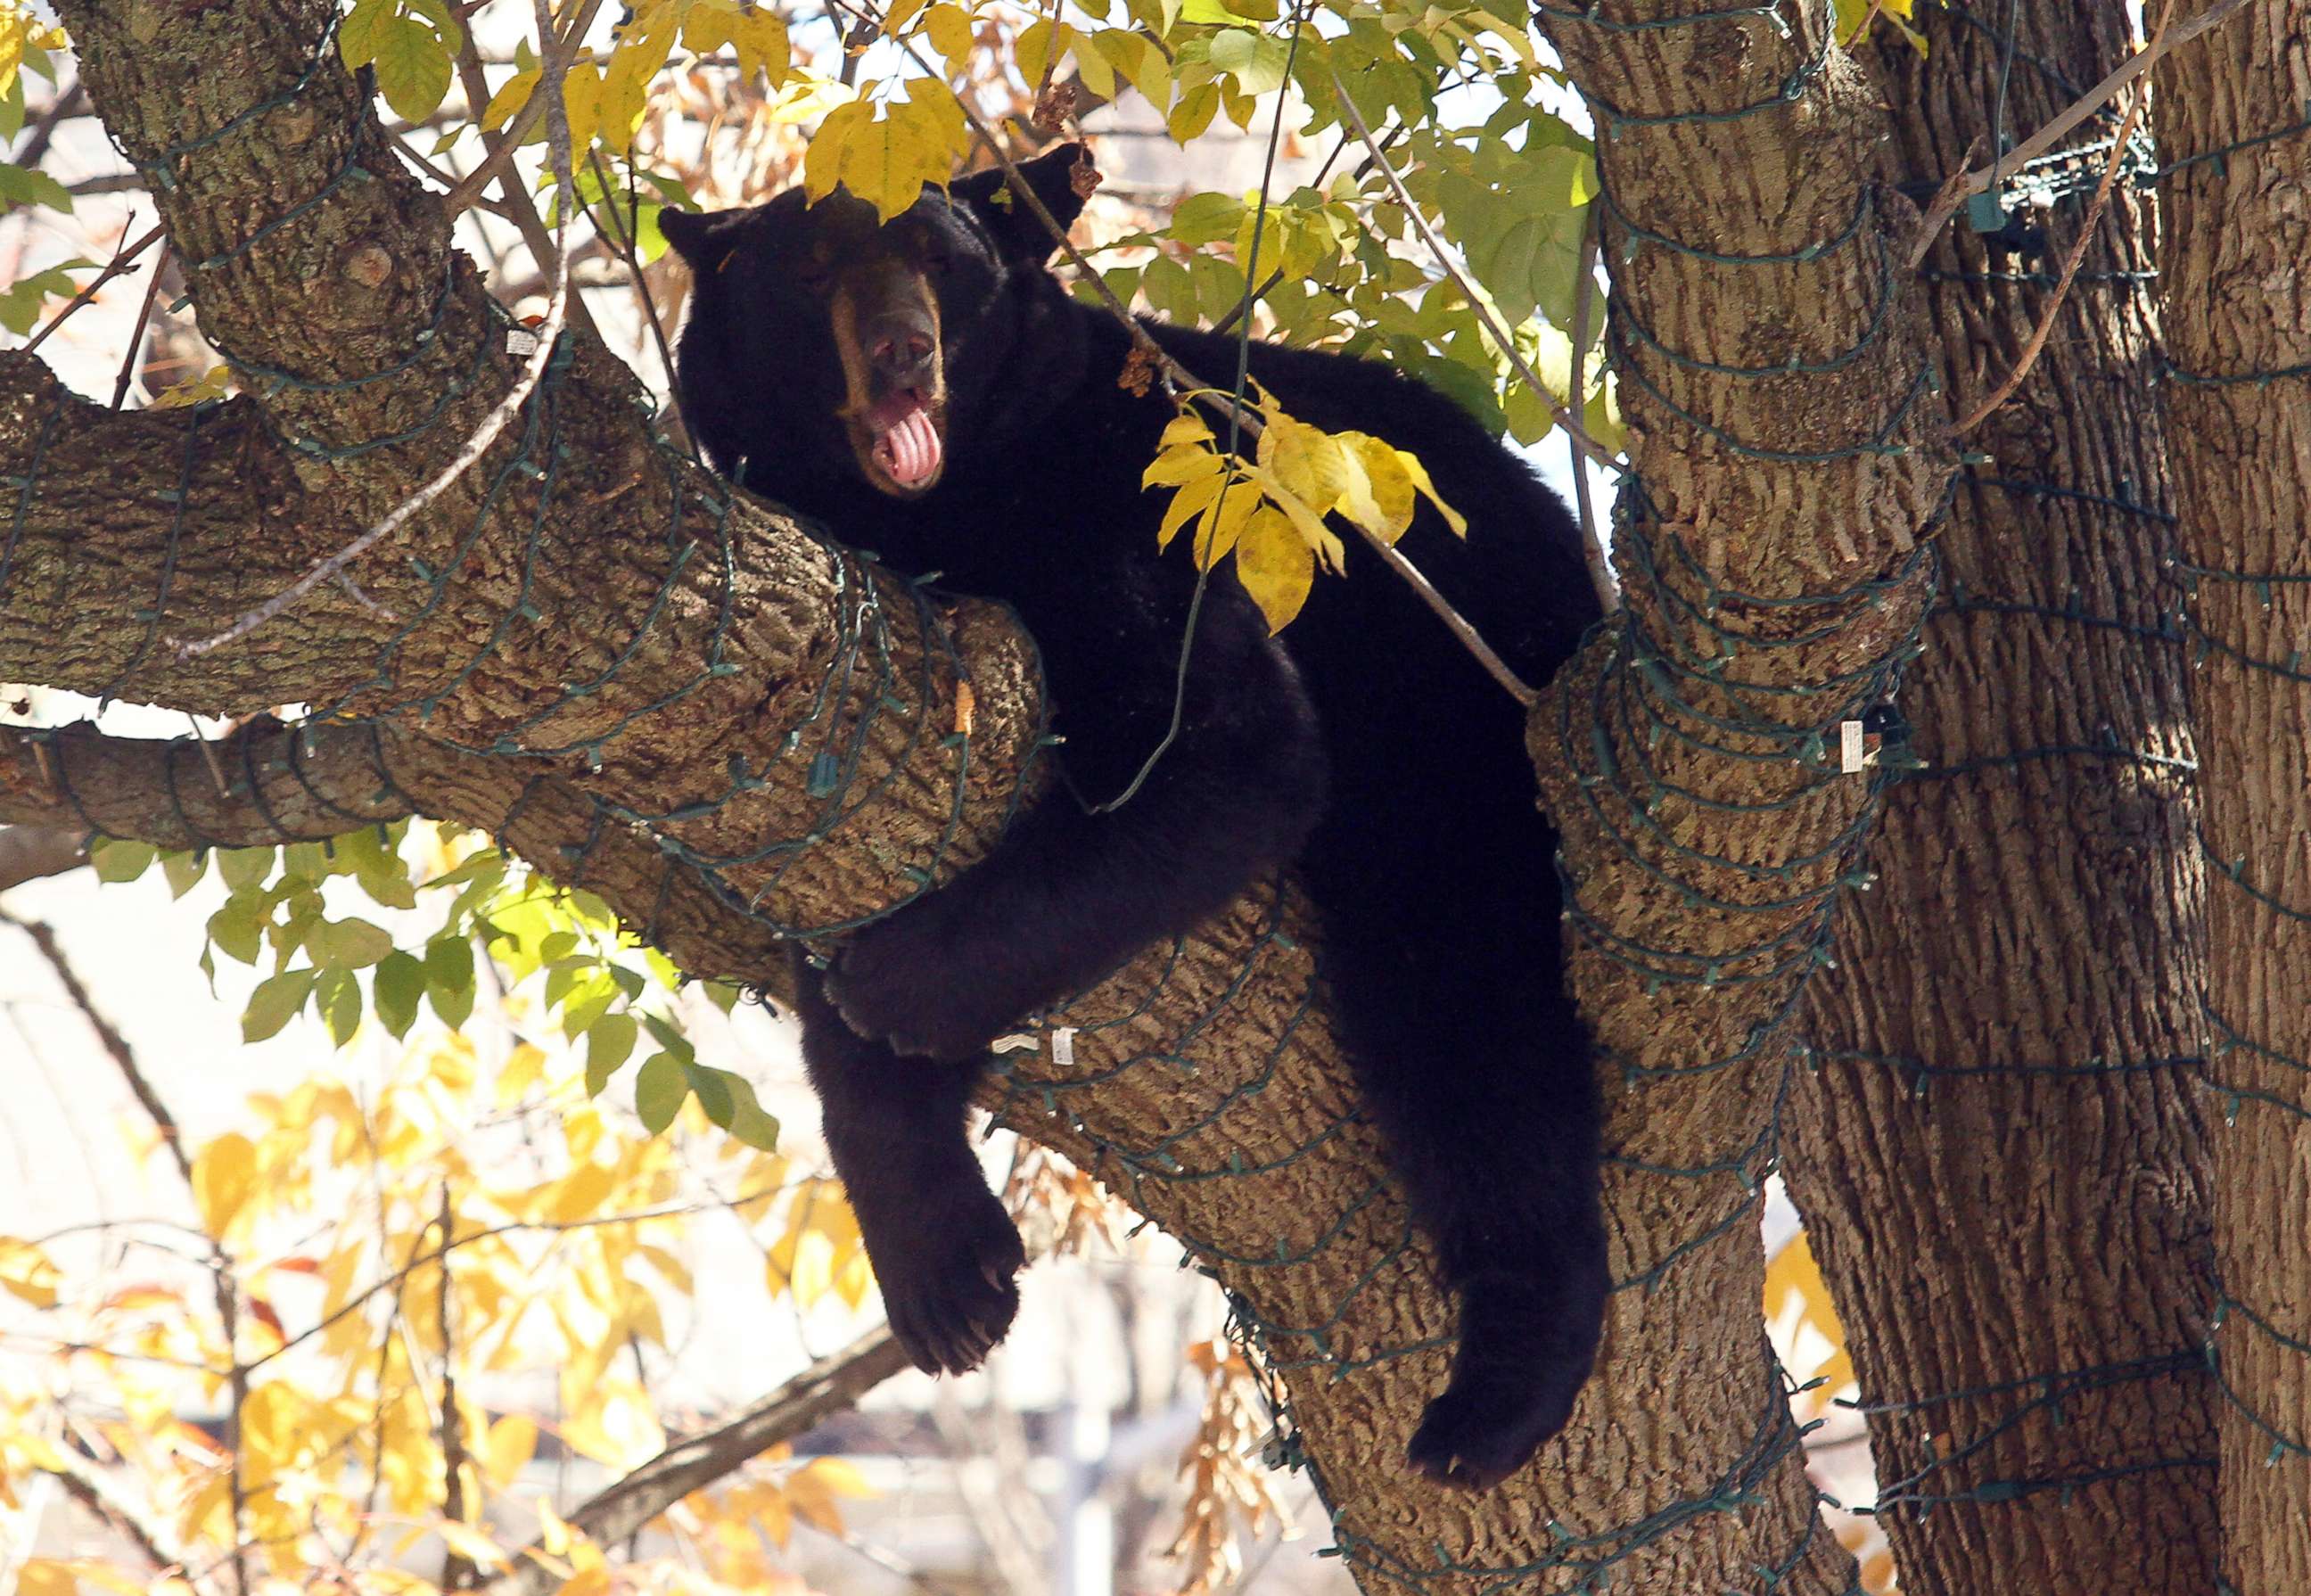 PHOTO: In this Oct. 26, 2015, file photo, a black bear rests in a tree at the Morristown Green public park in Morristown, N.J.